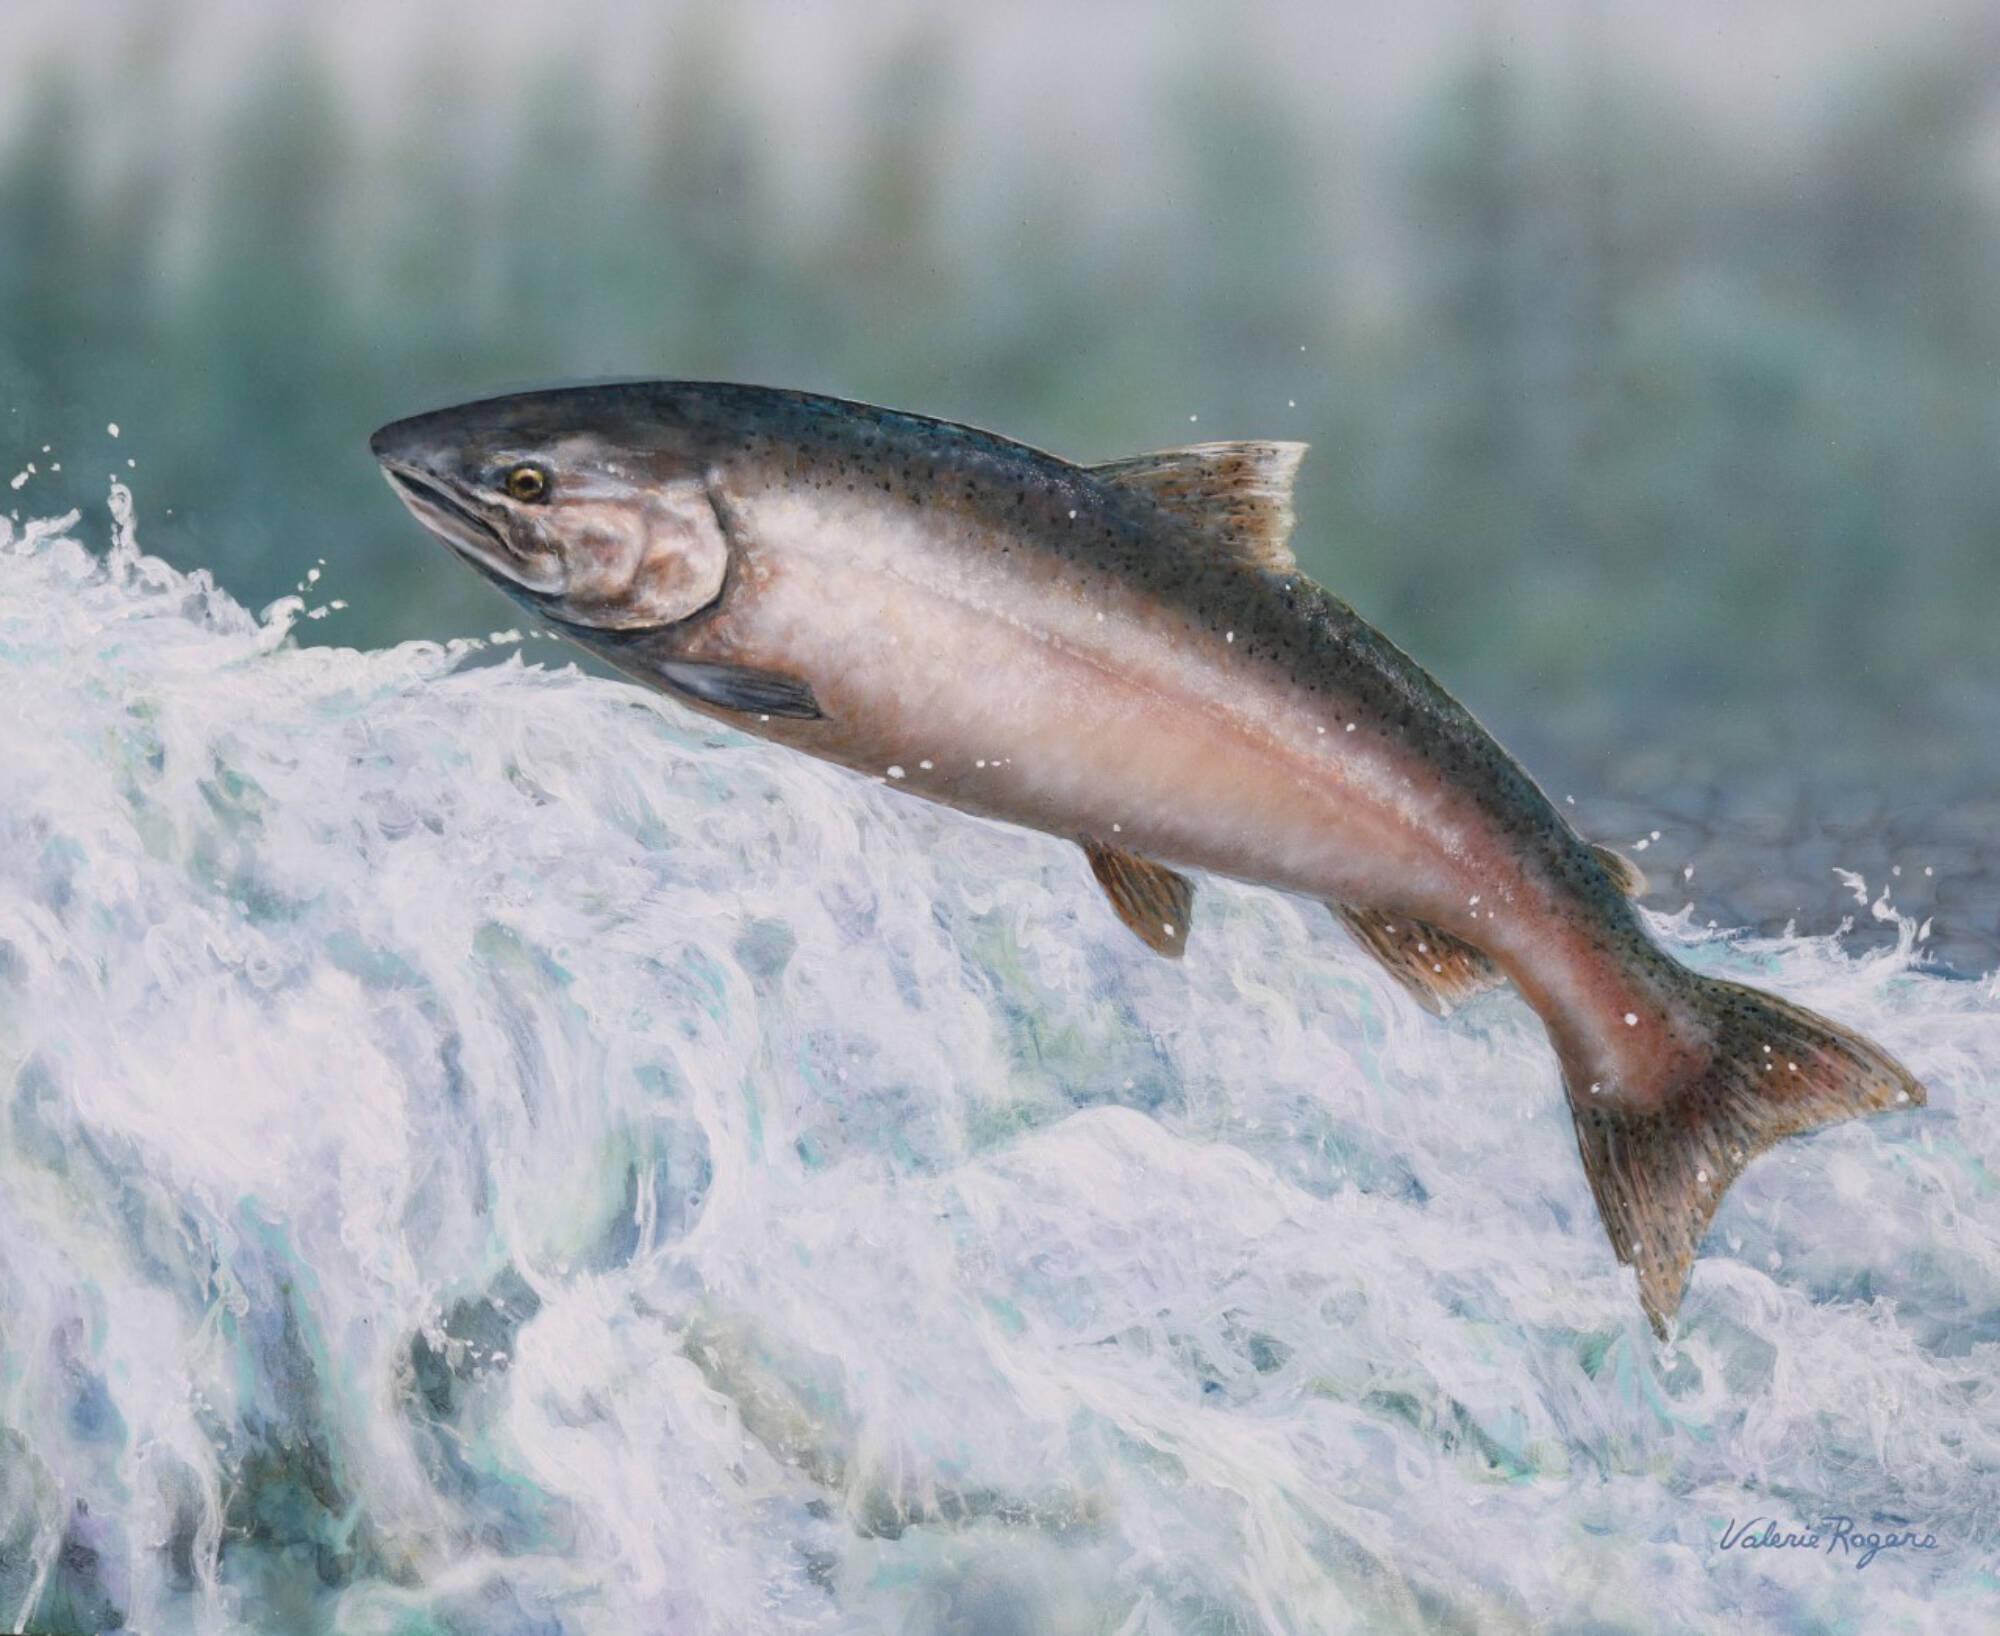 Rapid Ascent, Salmon Arm artist Valerie Rogers’ painting of a chinook salmon ascending rapids on its journey to spawn, is the winner of the Pacific Salmon Foundation’s prestigious Salmon Conservation Stamp Art Competition for 2023-24. (Photo contributed)